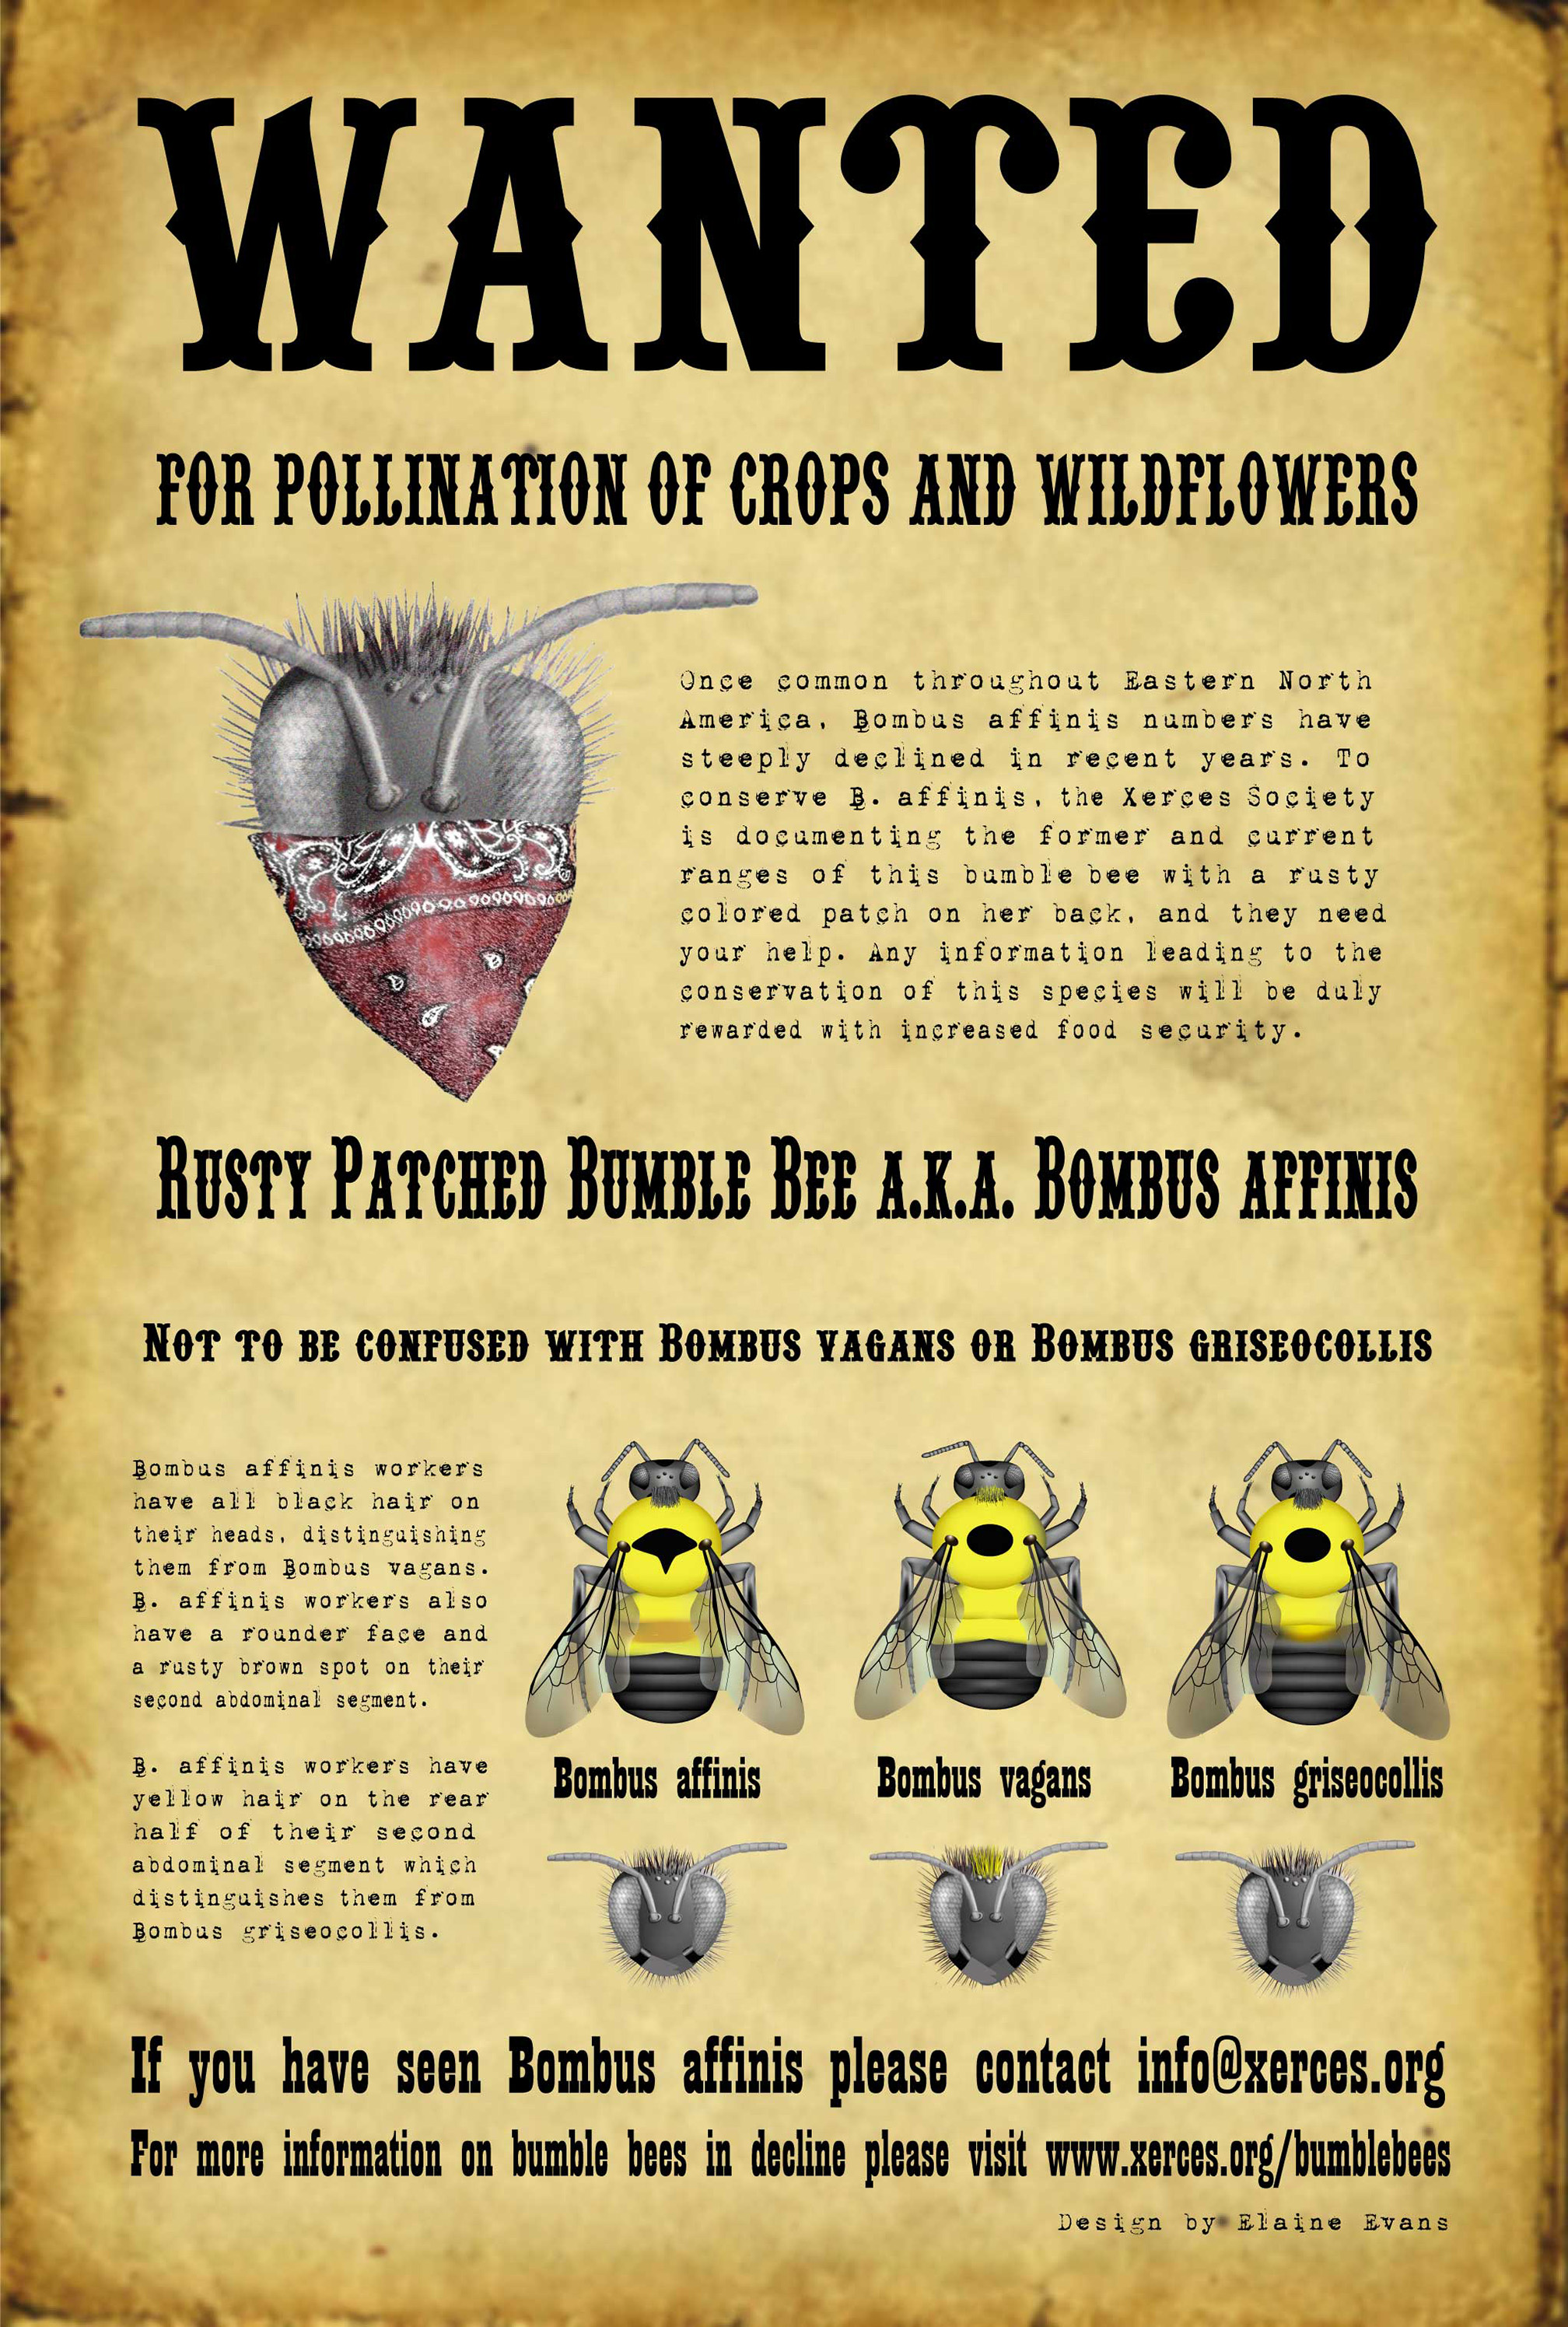 The poster has bold black text on a pale brown, textured background and drawings of bumble bees.